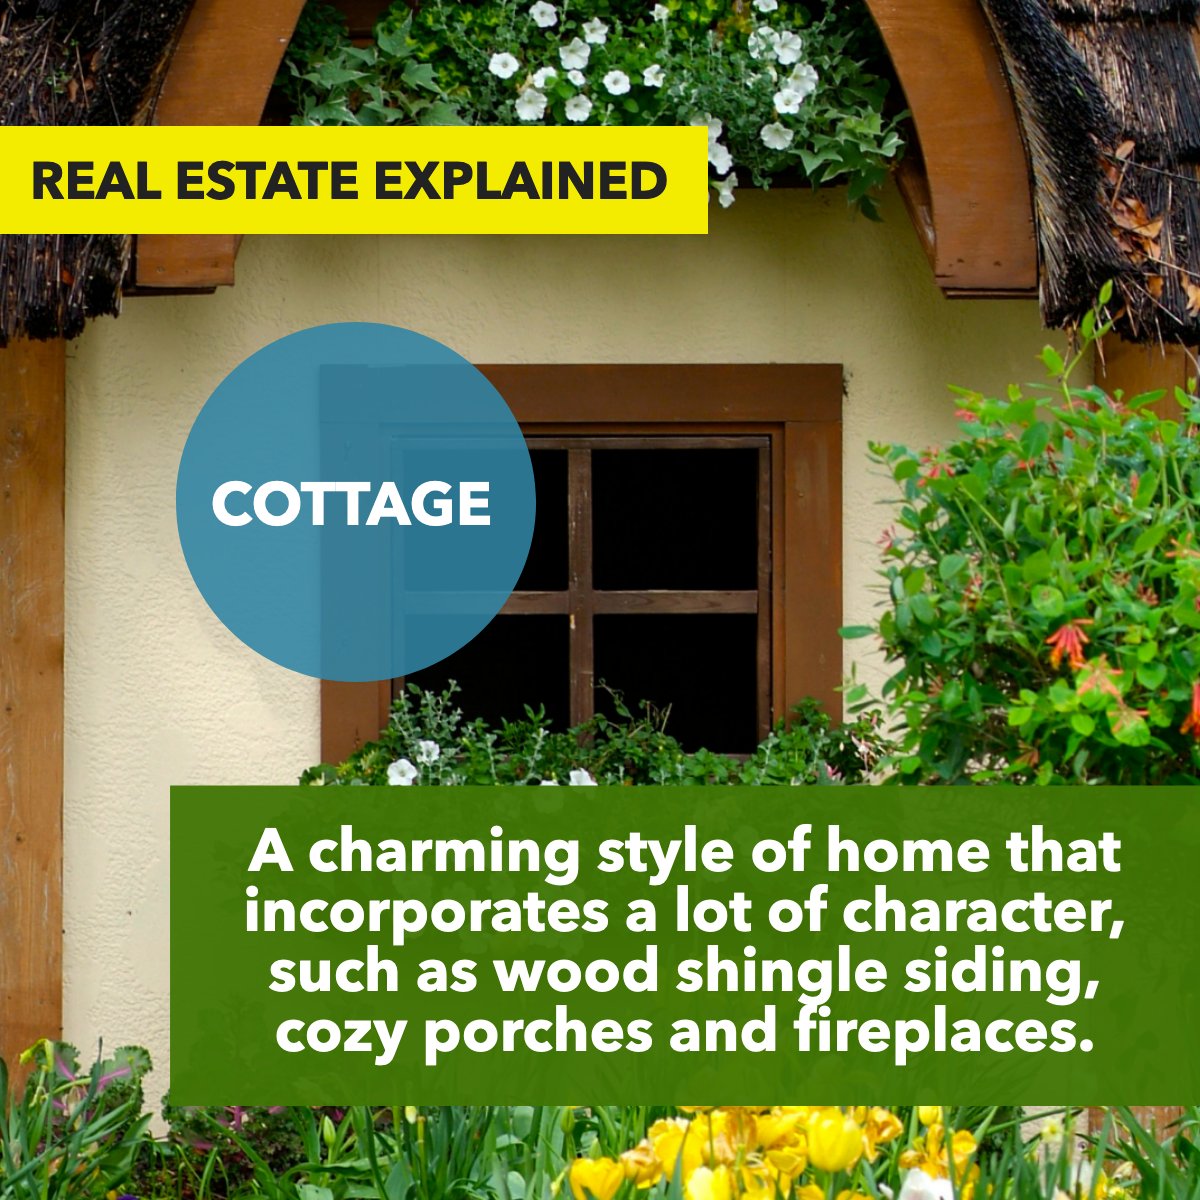 Did you know what a Cottage is? 🤔 

Is this the type of house that you like?

#cottagehome #cottagedecor #cottagestyledecor
 #RacingRealEstateAgent #BarrettRealEstate #StoneTreeRealEstateTeam #maricopaazrealestate #racingagent #arizonarealestate